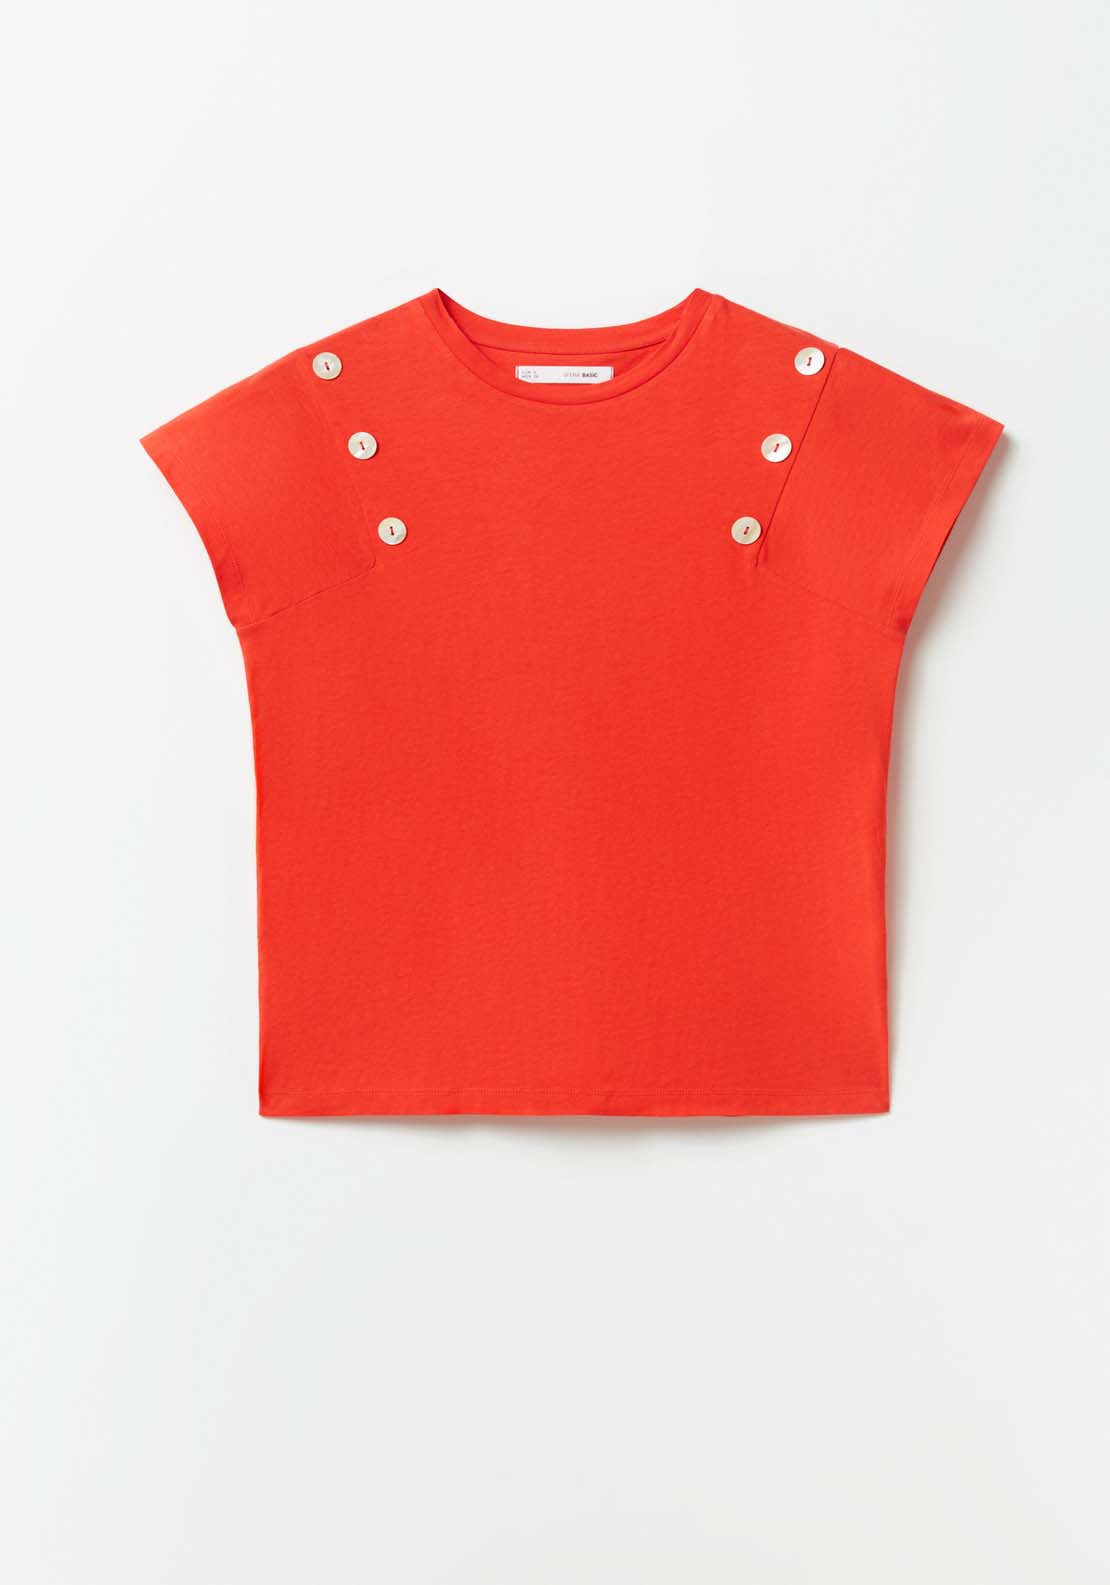 Sfera Short Sleeve Top - Red 5 Shaws Department Stores